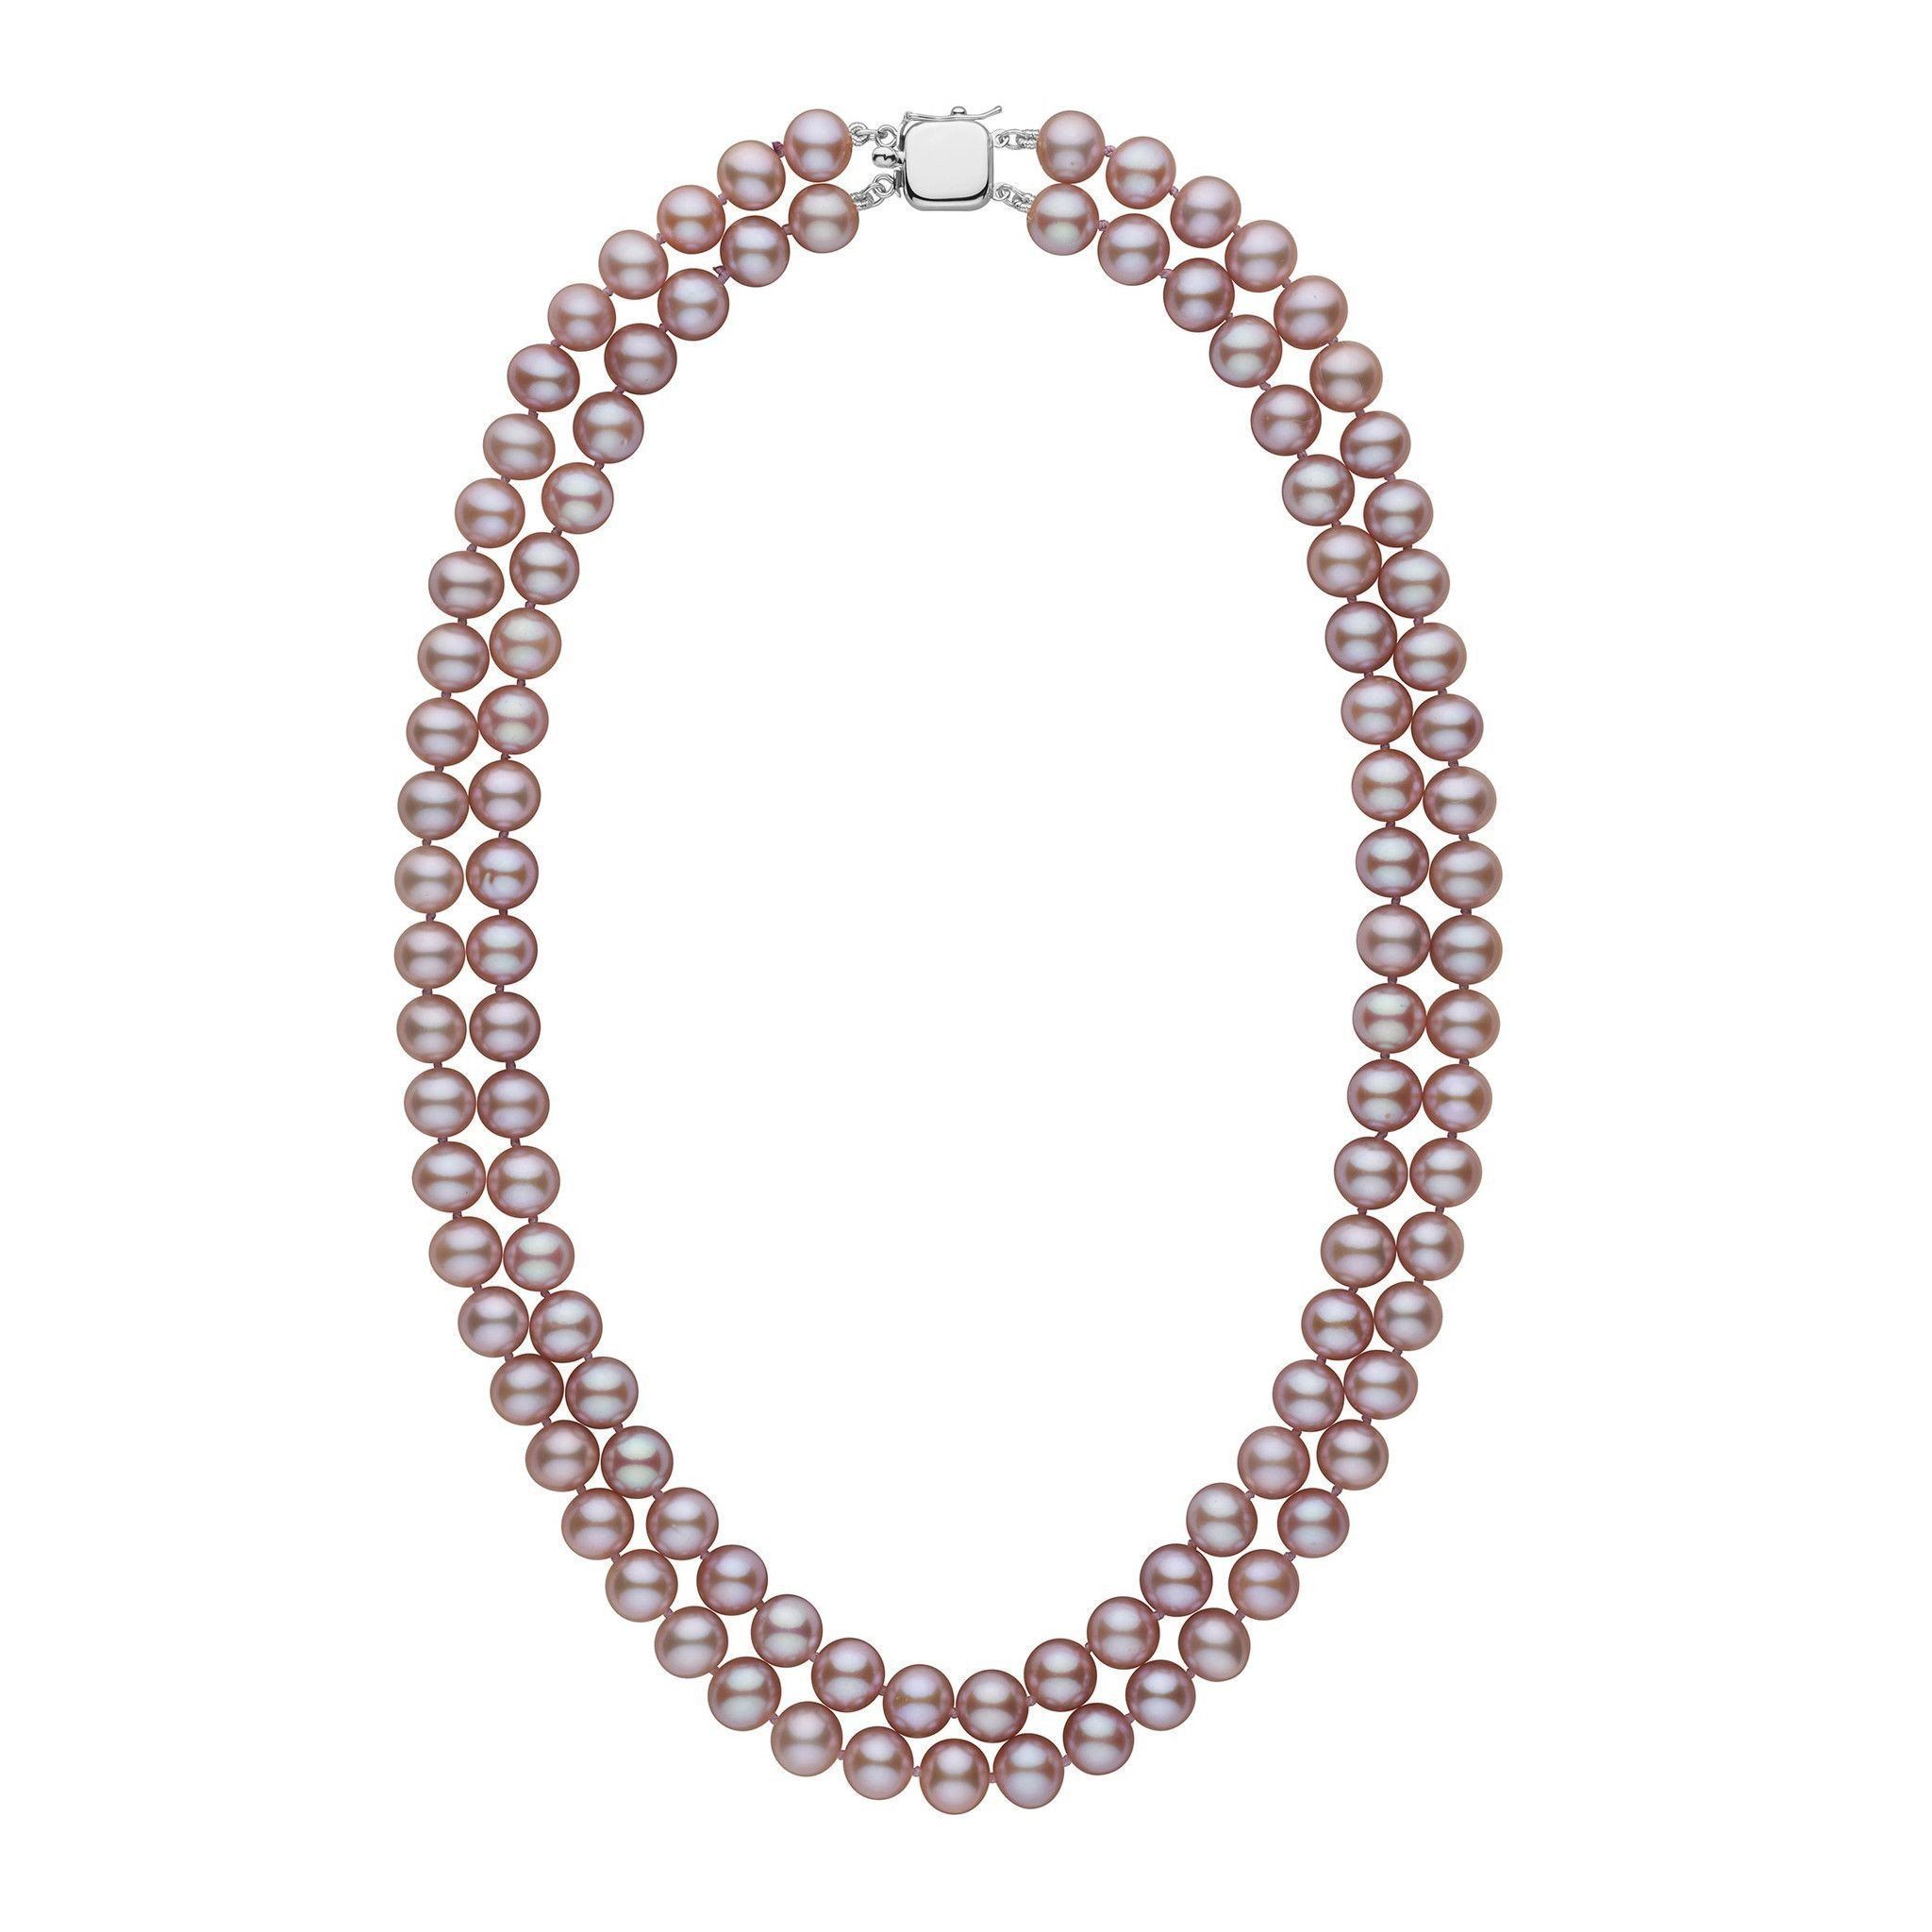 7.5-8.0 mm Double Strand AAA Lavender Freshwater Pearl Necklace